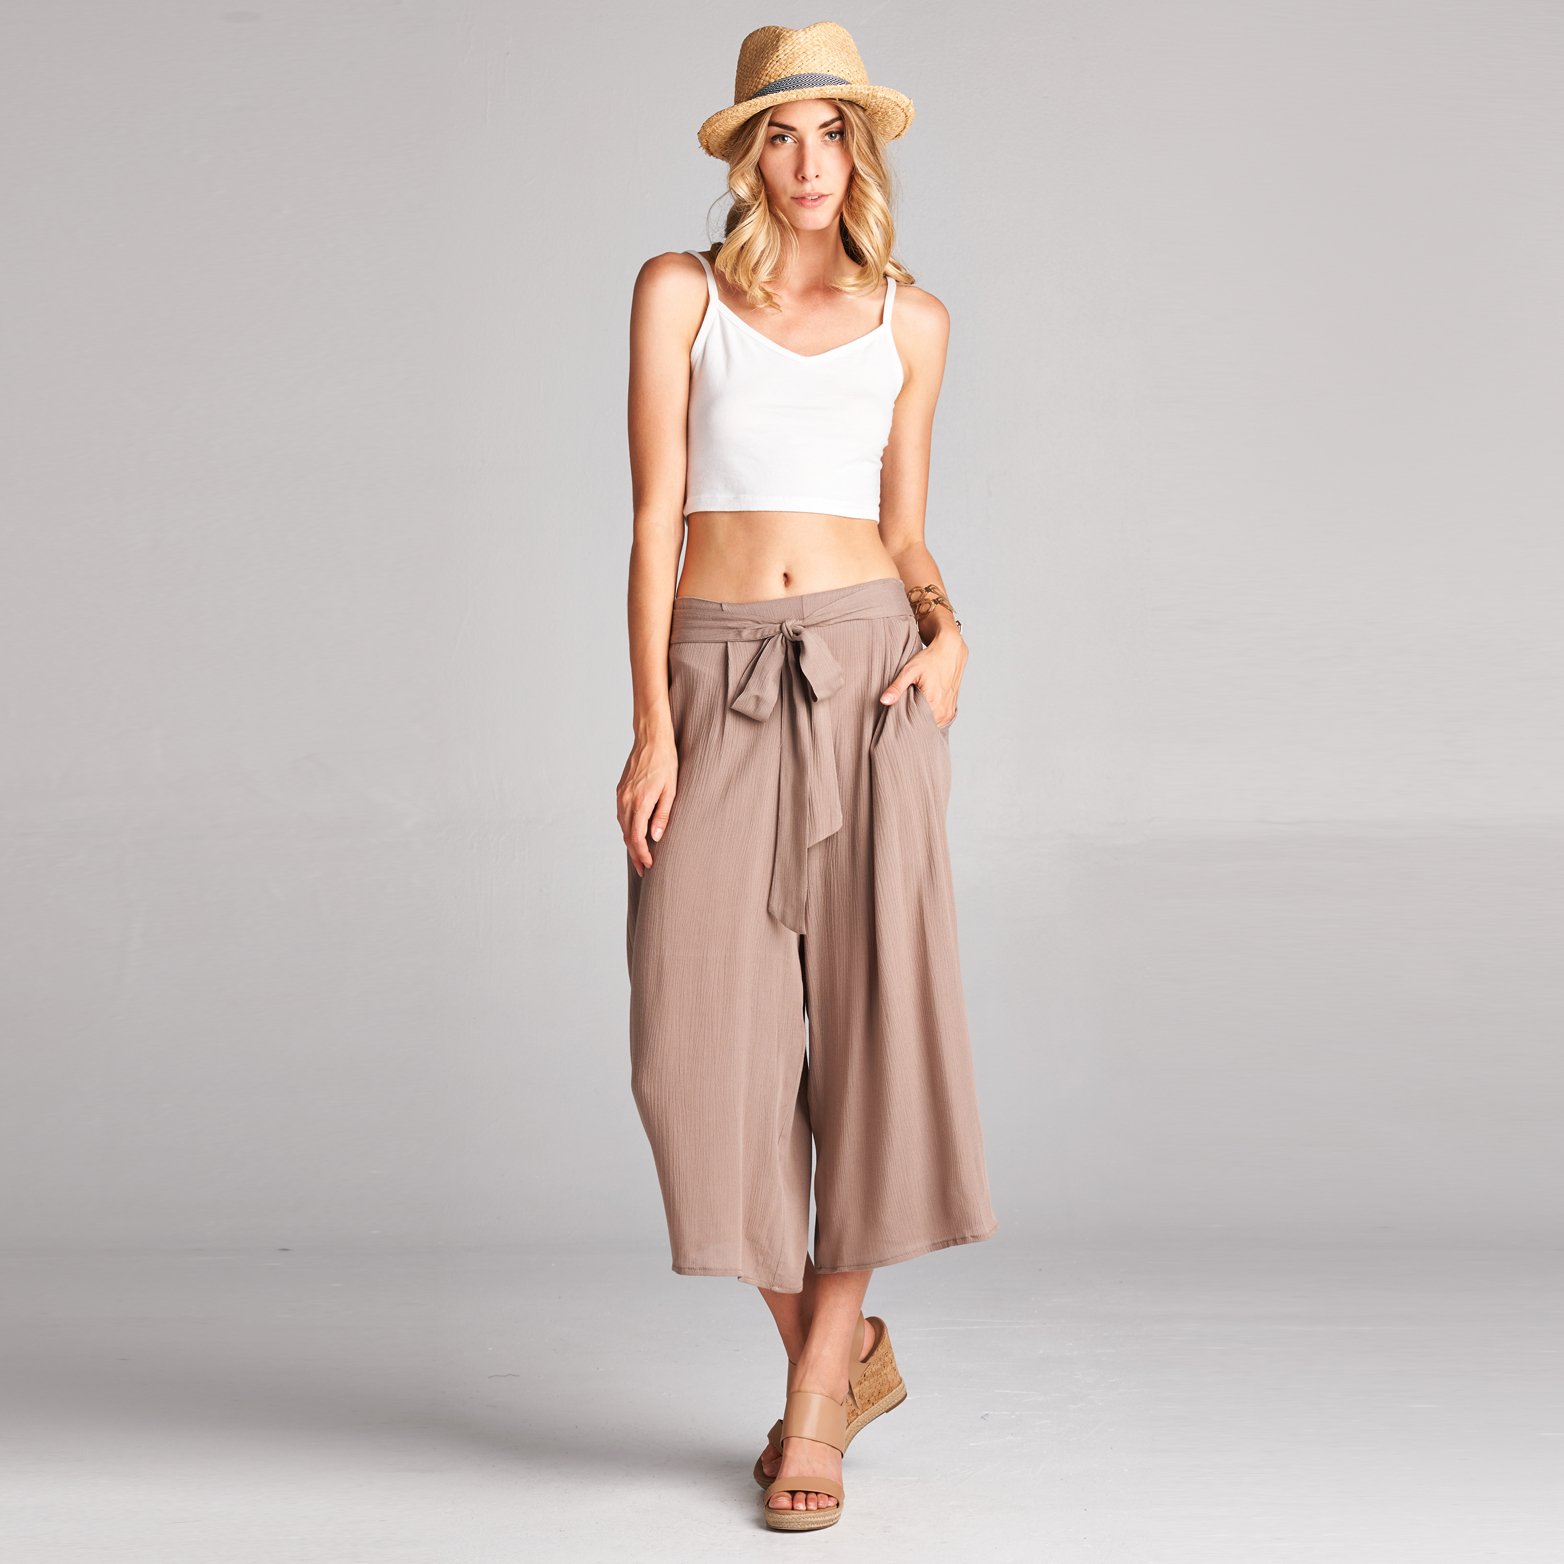 Gauze Culotte Trouser With Pockets In 3 Colors - Mocha, Small (2-4)